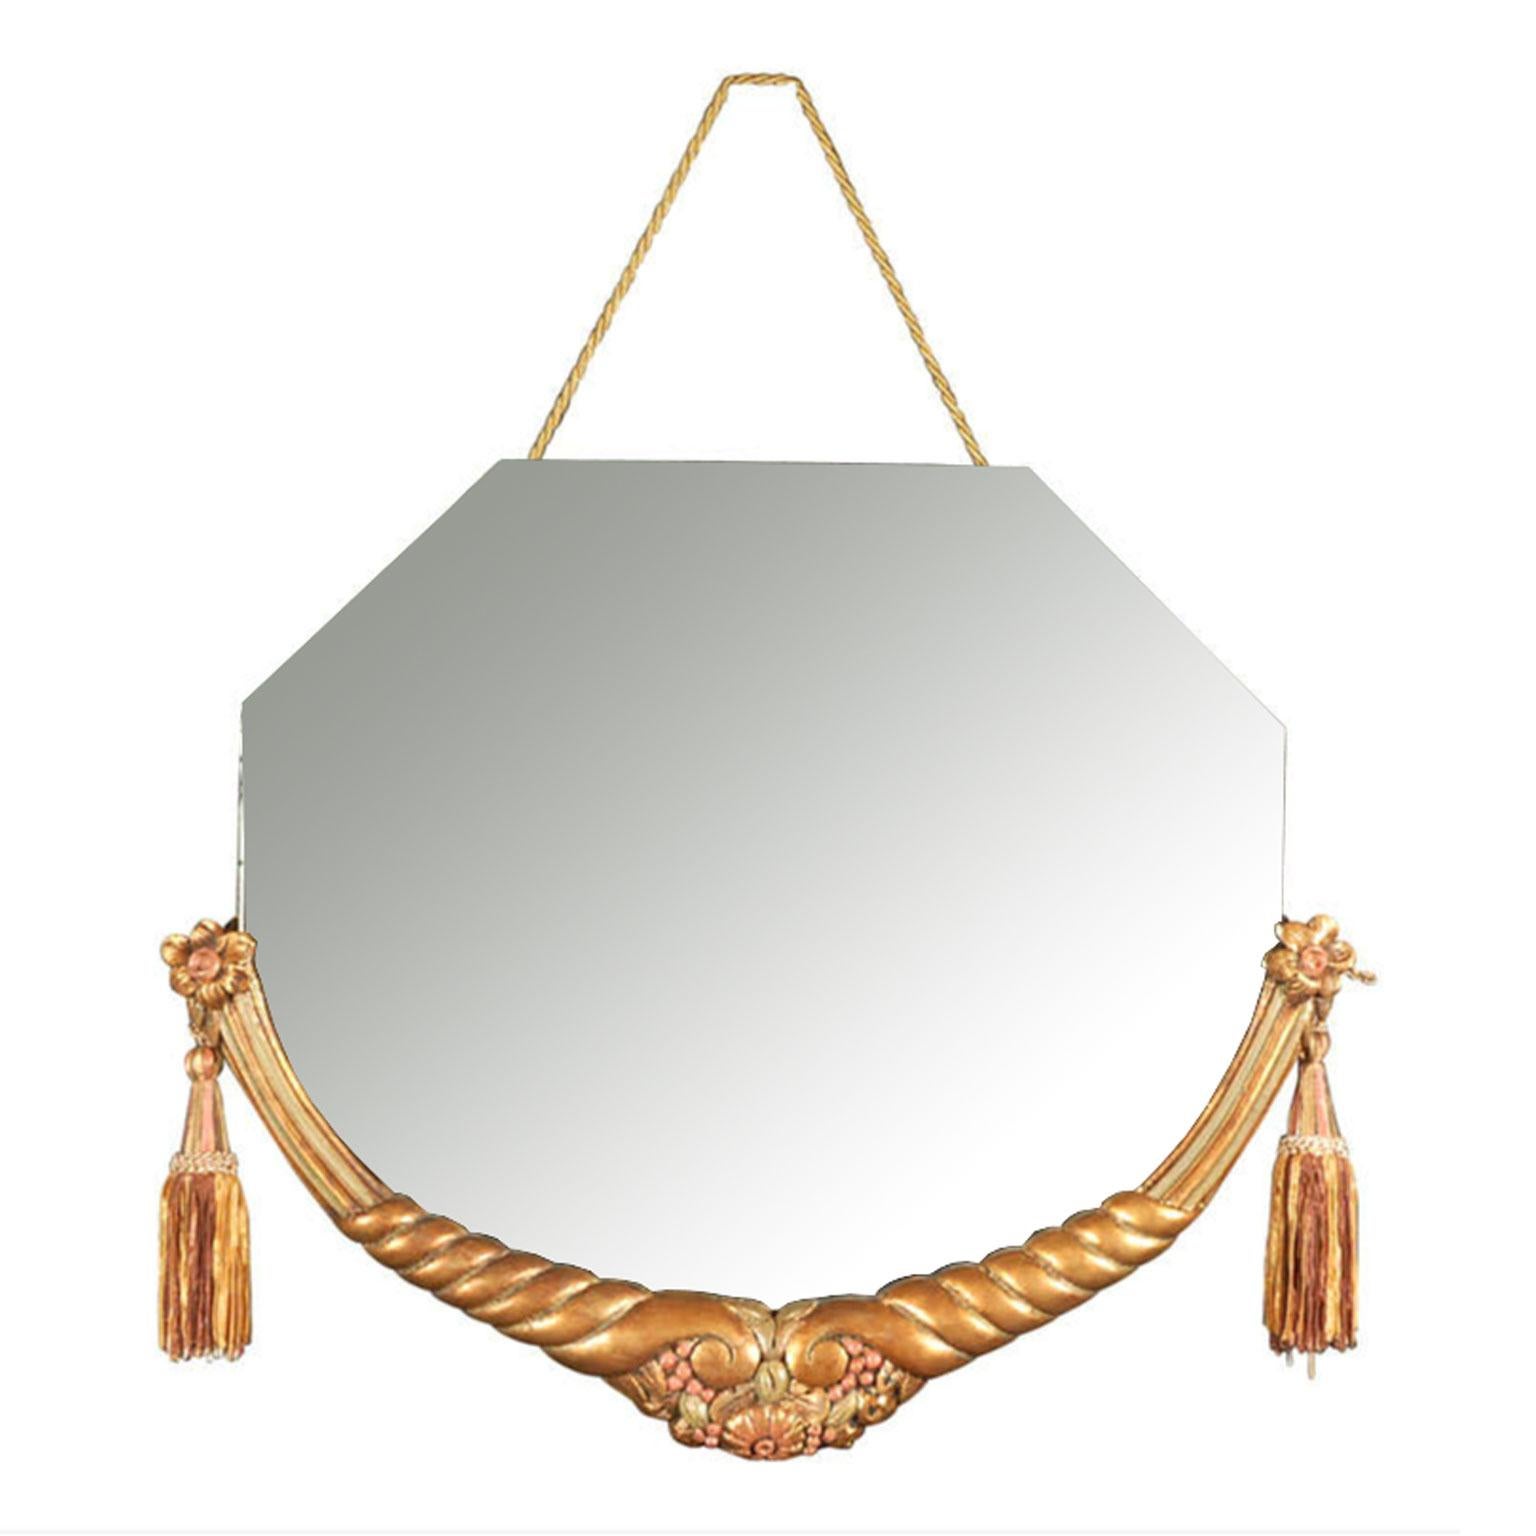 Original Art Deco Mirror Attributed to Maurice Jallot